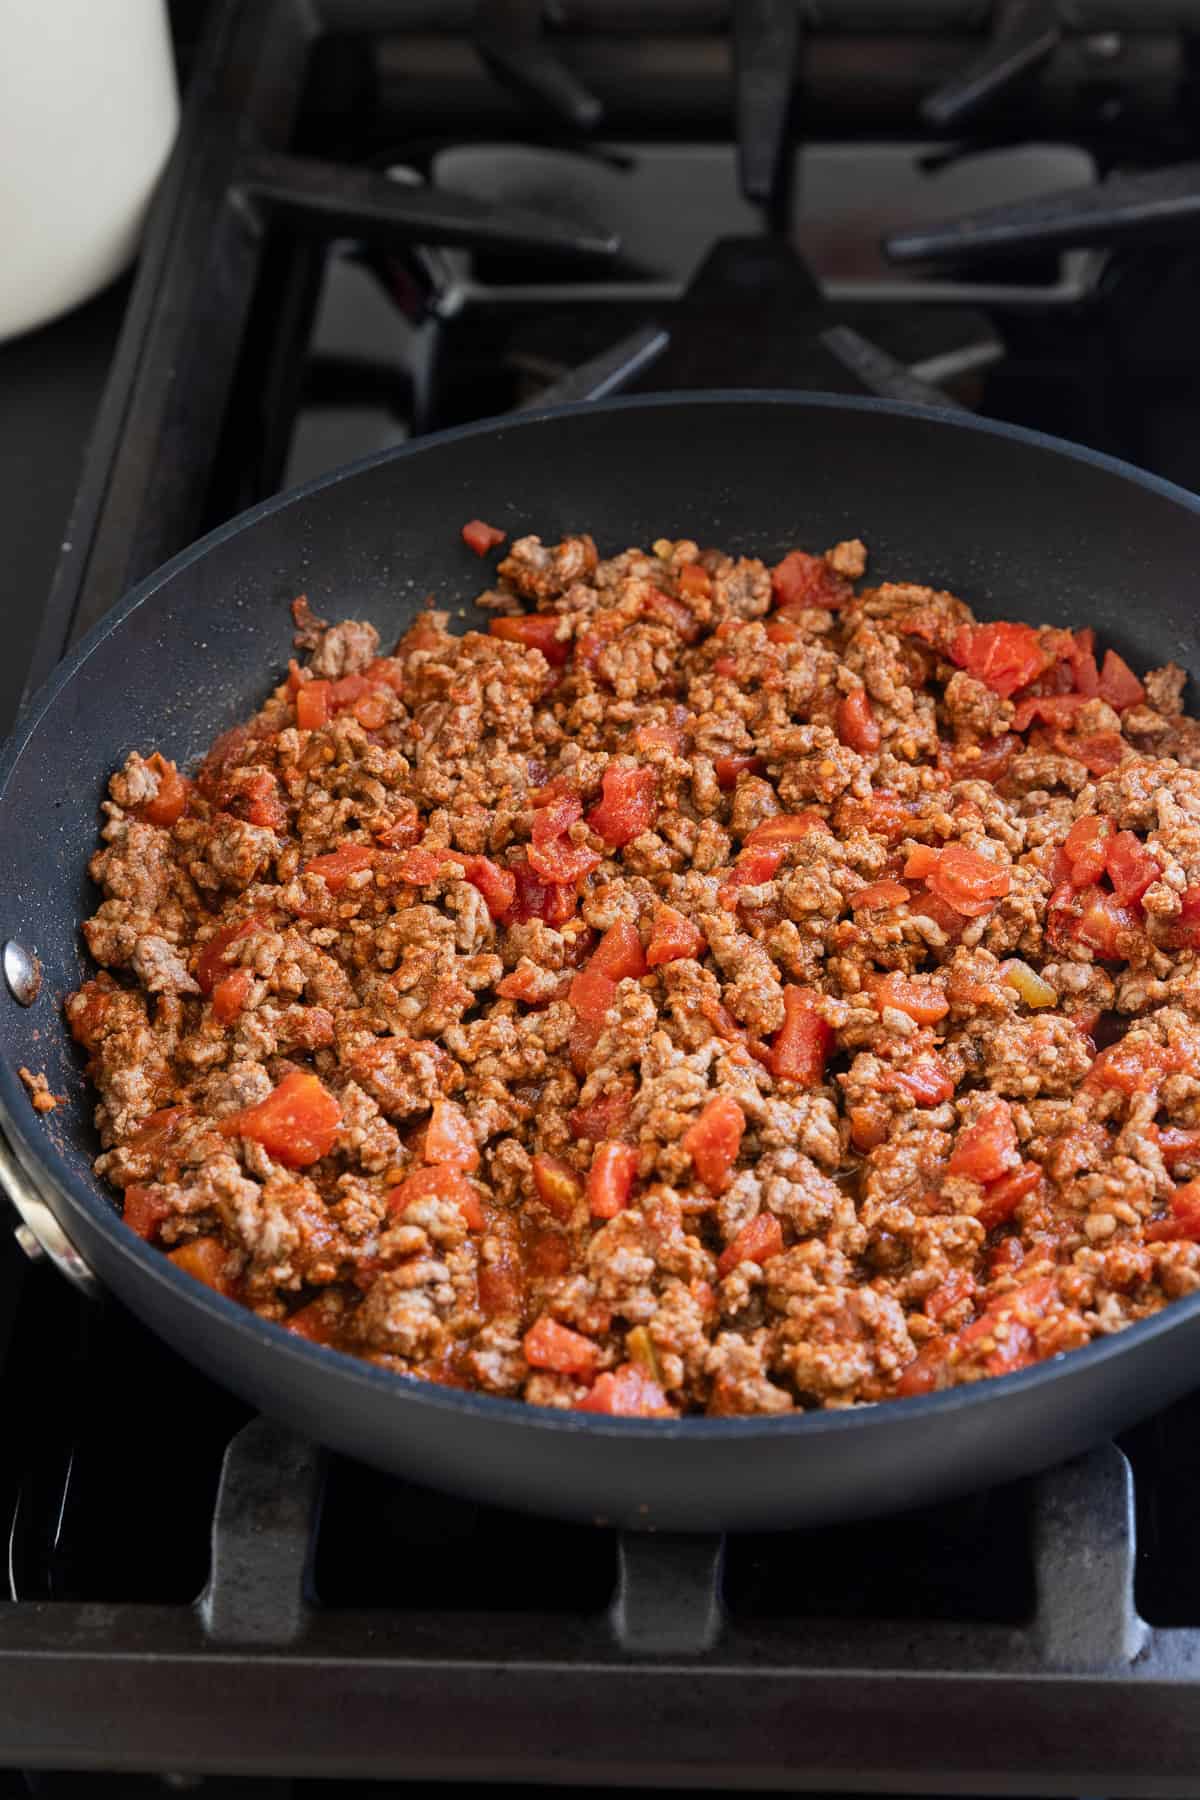 Ground beef cooked with seasoning and tomatoesl.